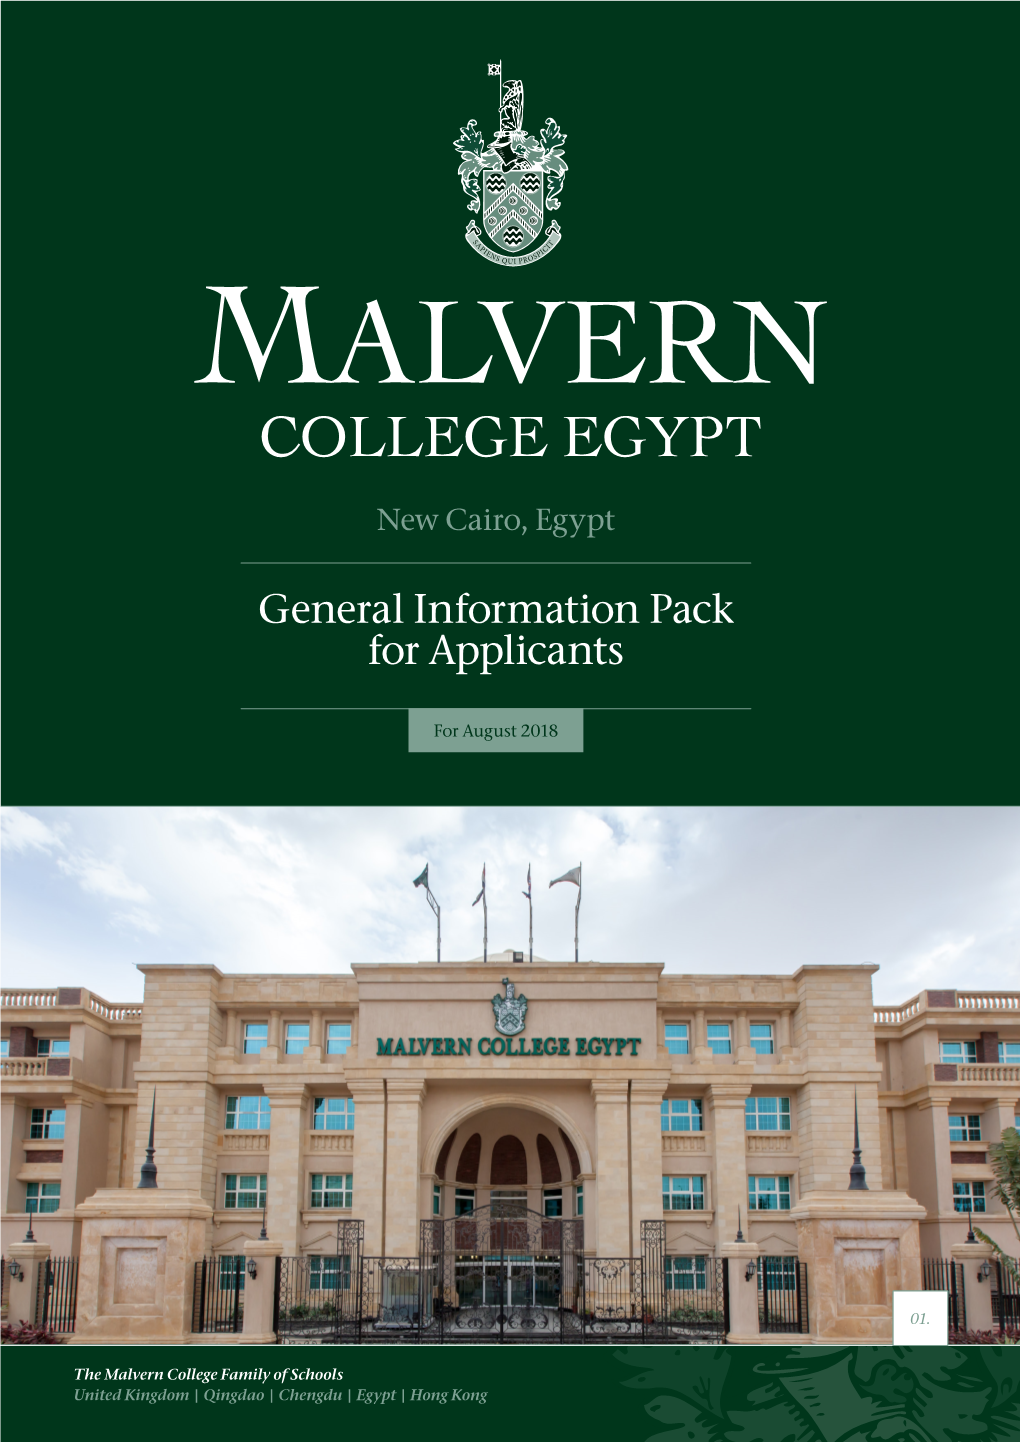 General Information Pack for Applicants